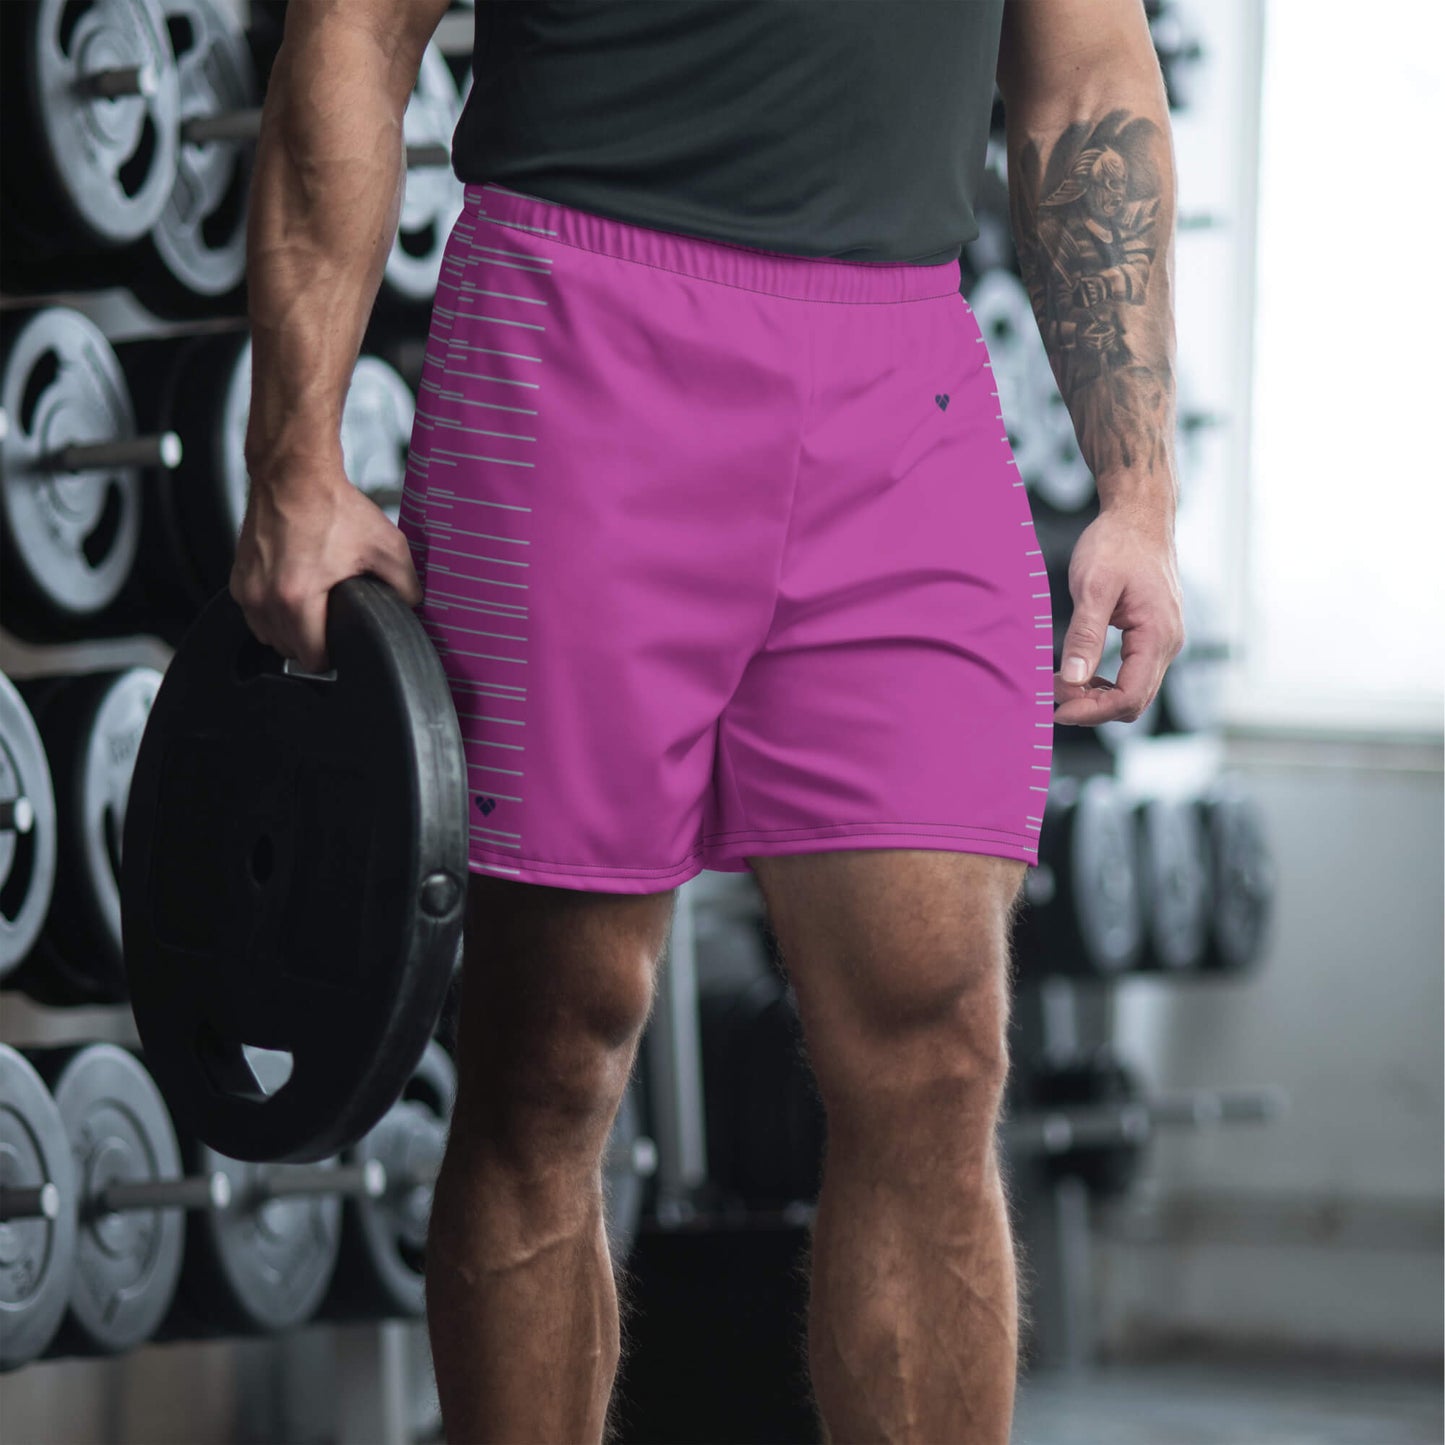 Fucsia Pink Dual Sport Shorts for Men by CRiZ AMOR